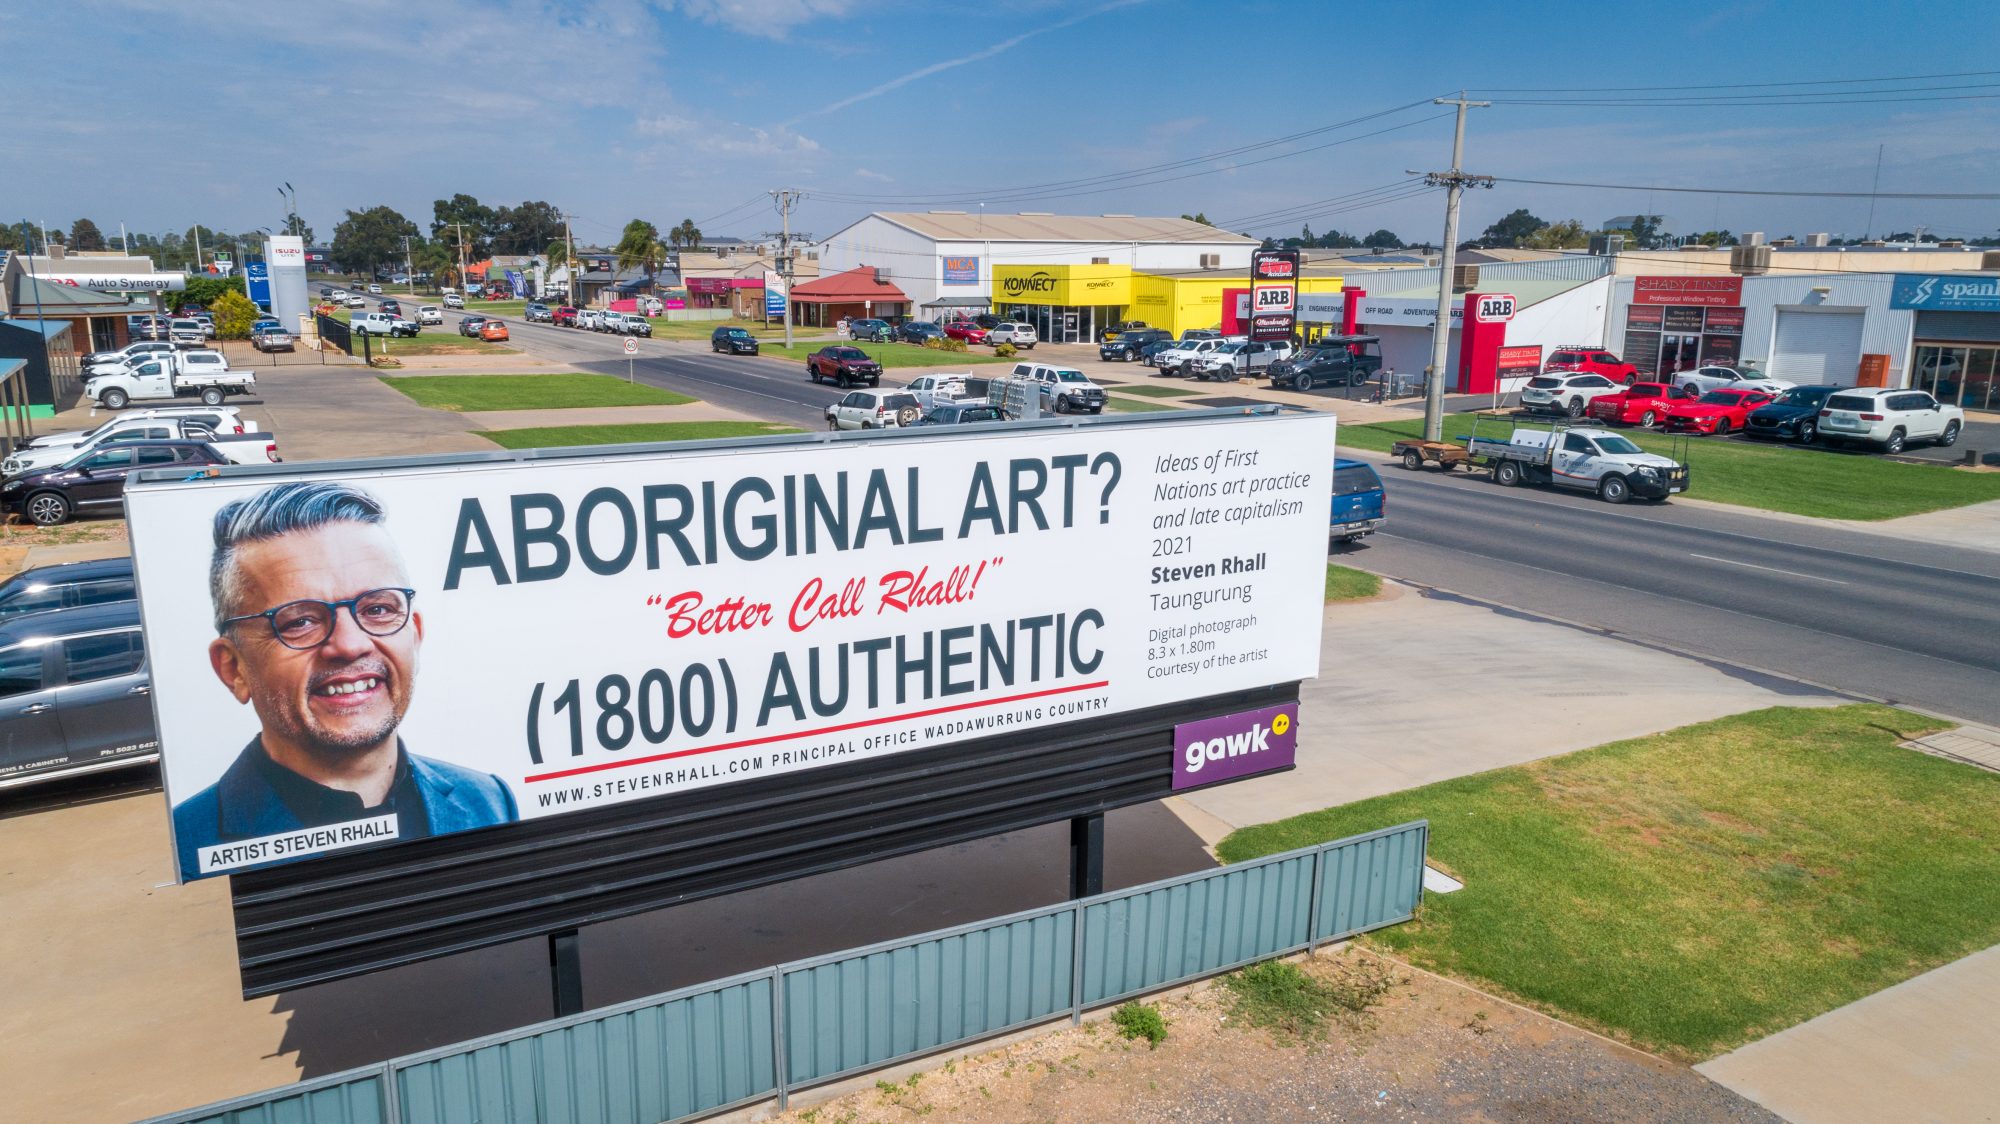 Image Description: ⁠
A billboard with black and red text, on the left is the head and shoulders of a smiling Taunarung man in a grey suit with overlaid text that reads “Artist Steven Rhall. The billboard's text reads: “Aboriginal Art? Better Call Rhall! (1800) Authentic.” The billboard is in an industrial area, the photograph  is taken from an angle high up (from a drone).